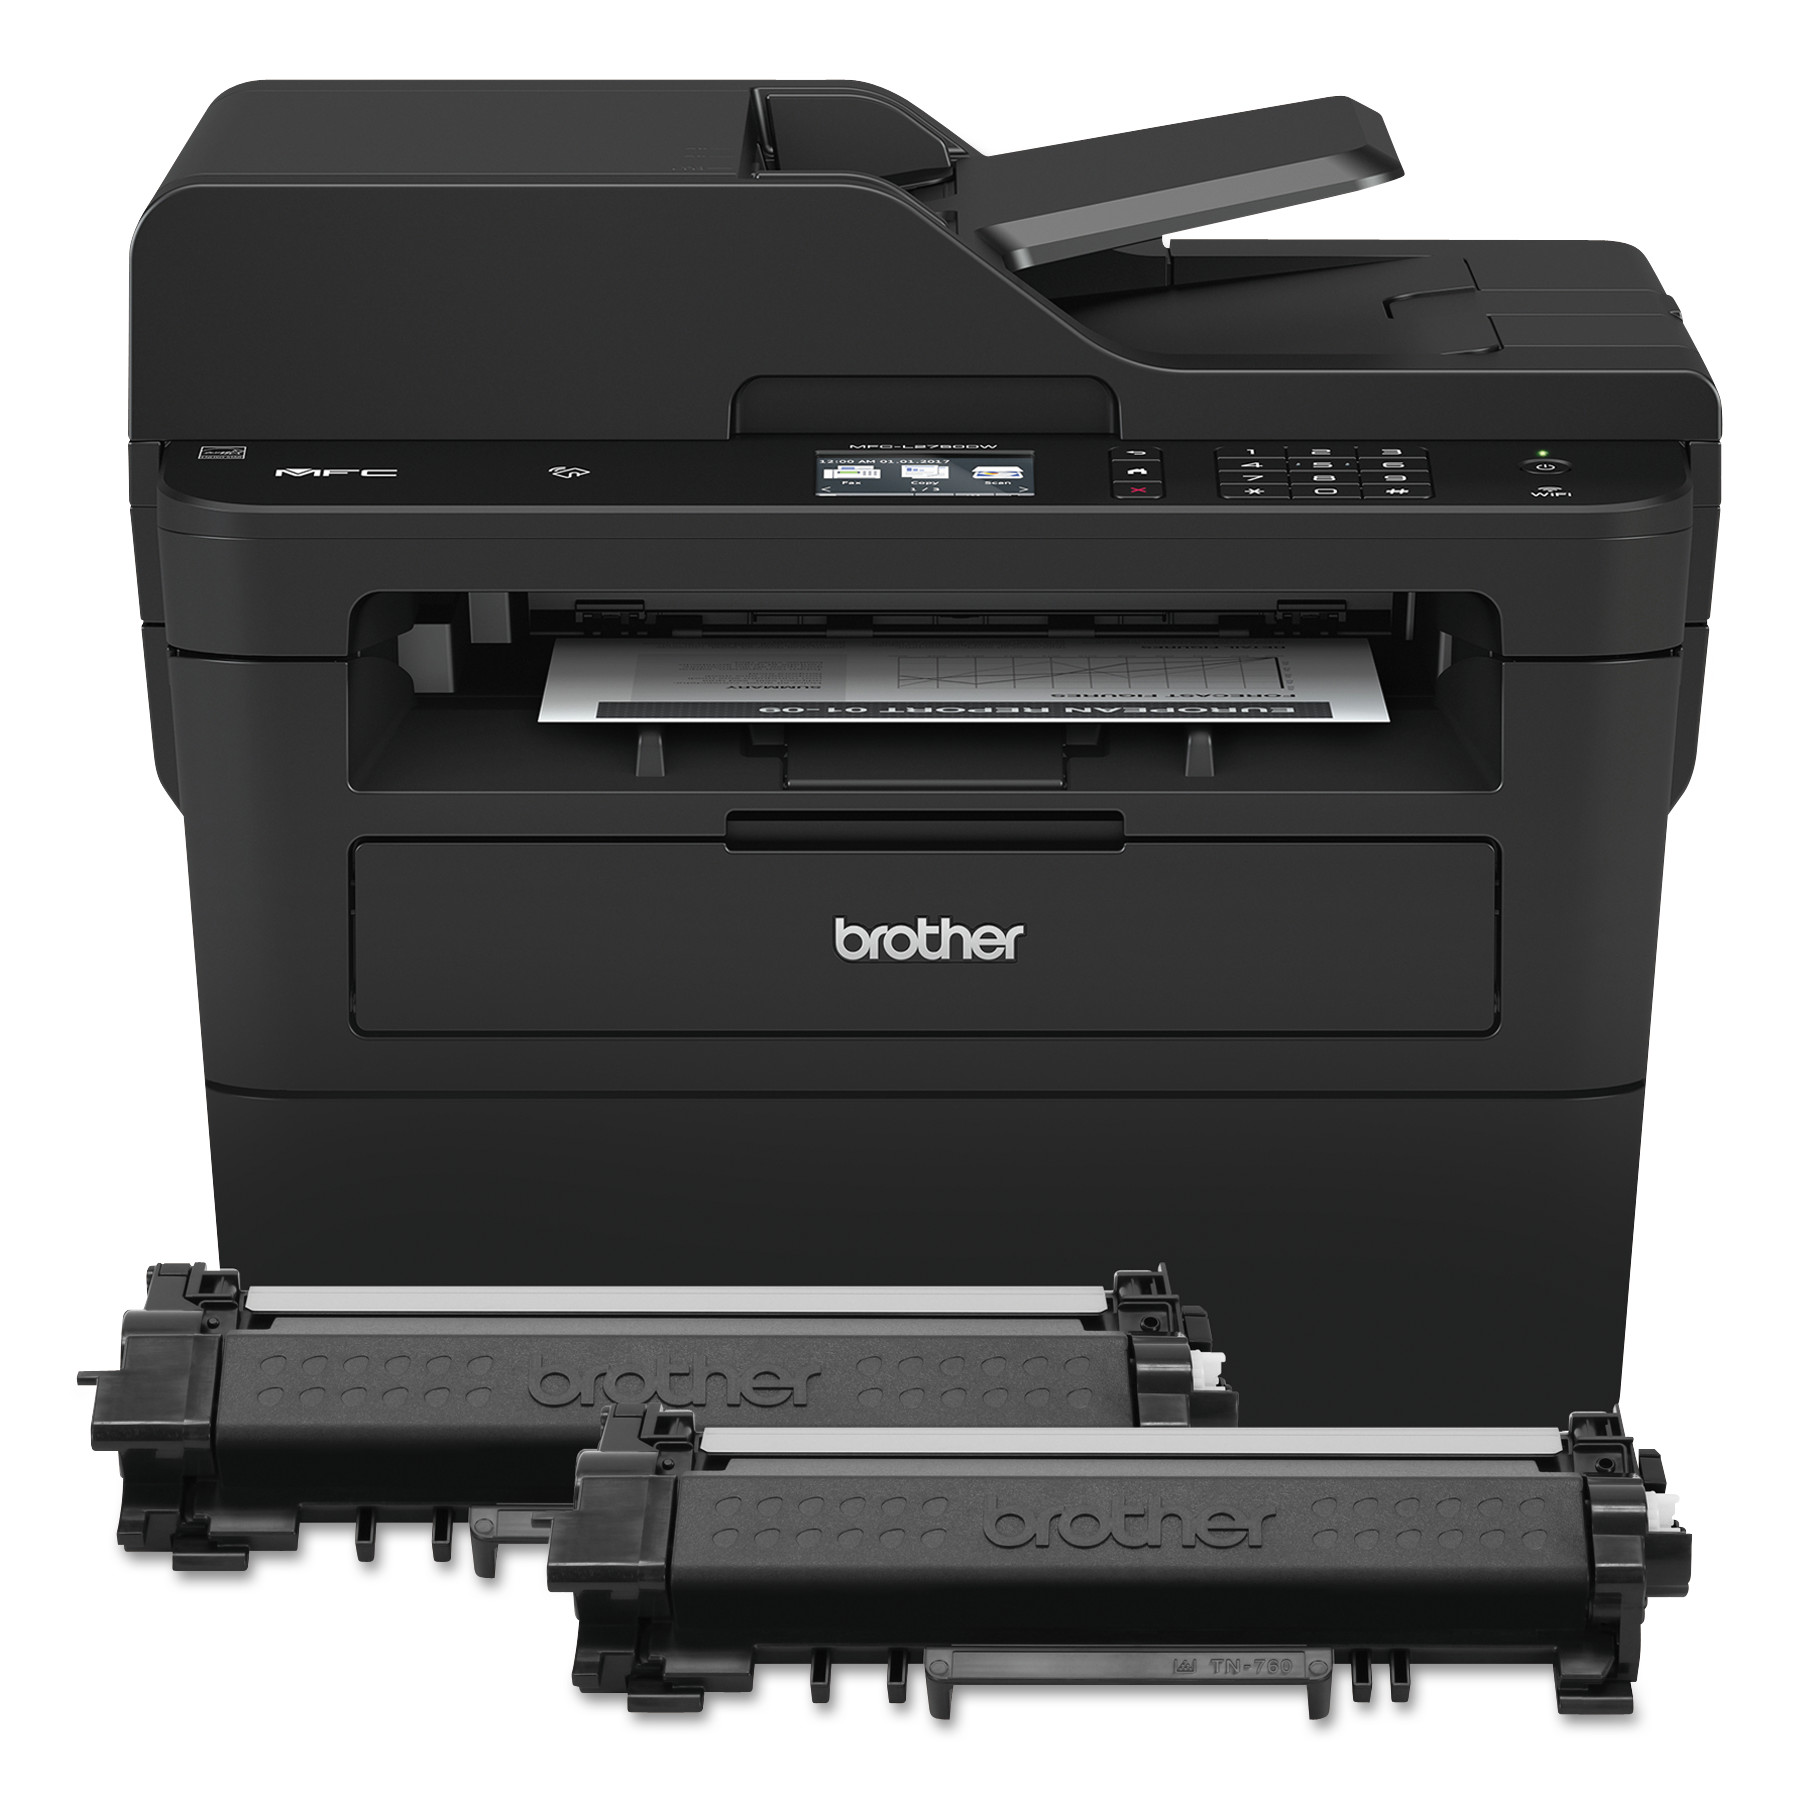  Brother MFCL2750DWXL MFCL2750DWXL XL Extended Print Compact Laser All-in-One Printer with Up to 2-Years of Toner In-Box (BRTMFCL2750DWXL) 